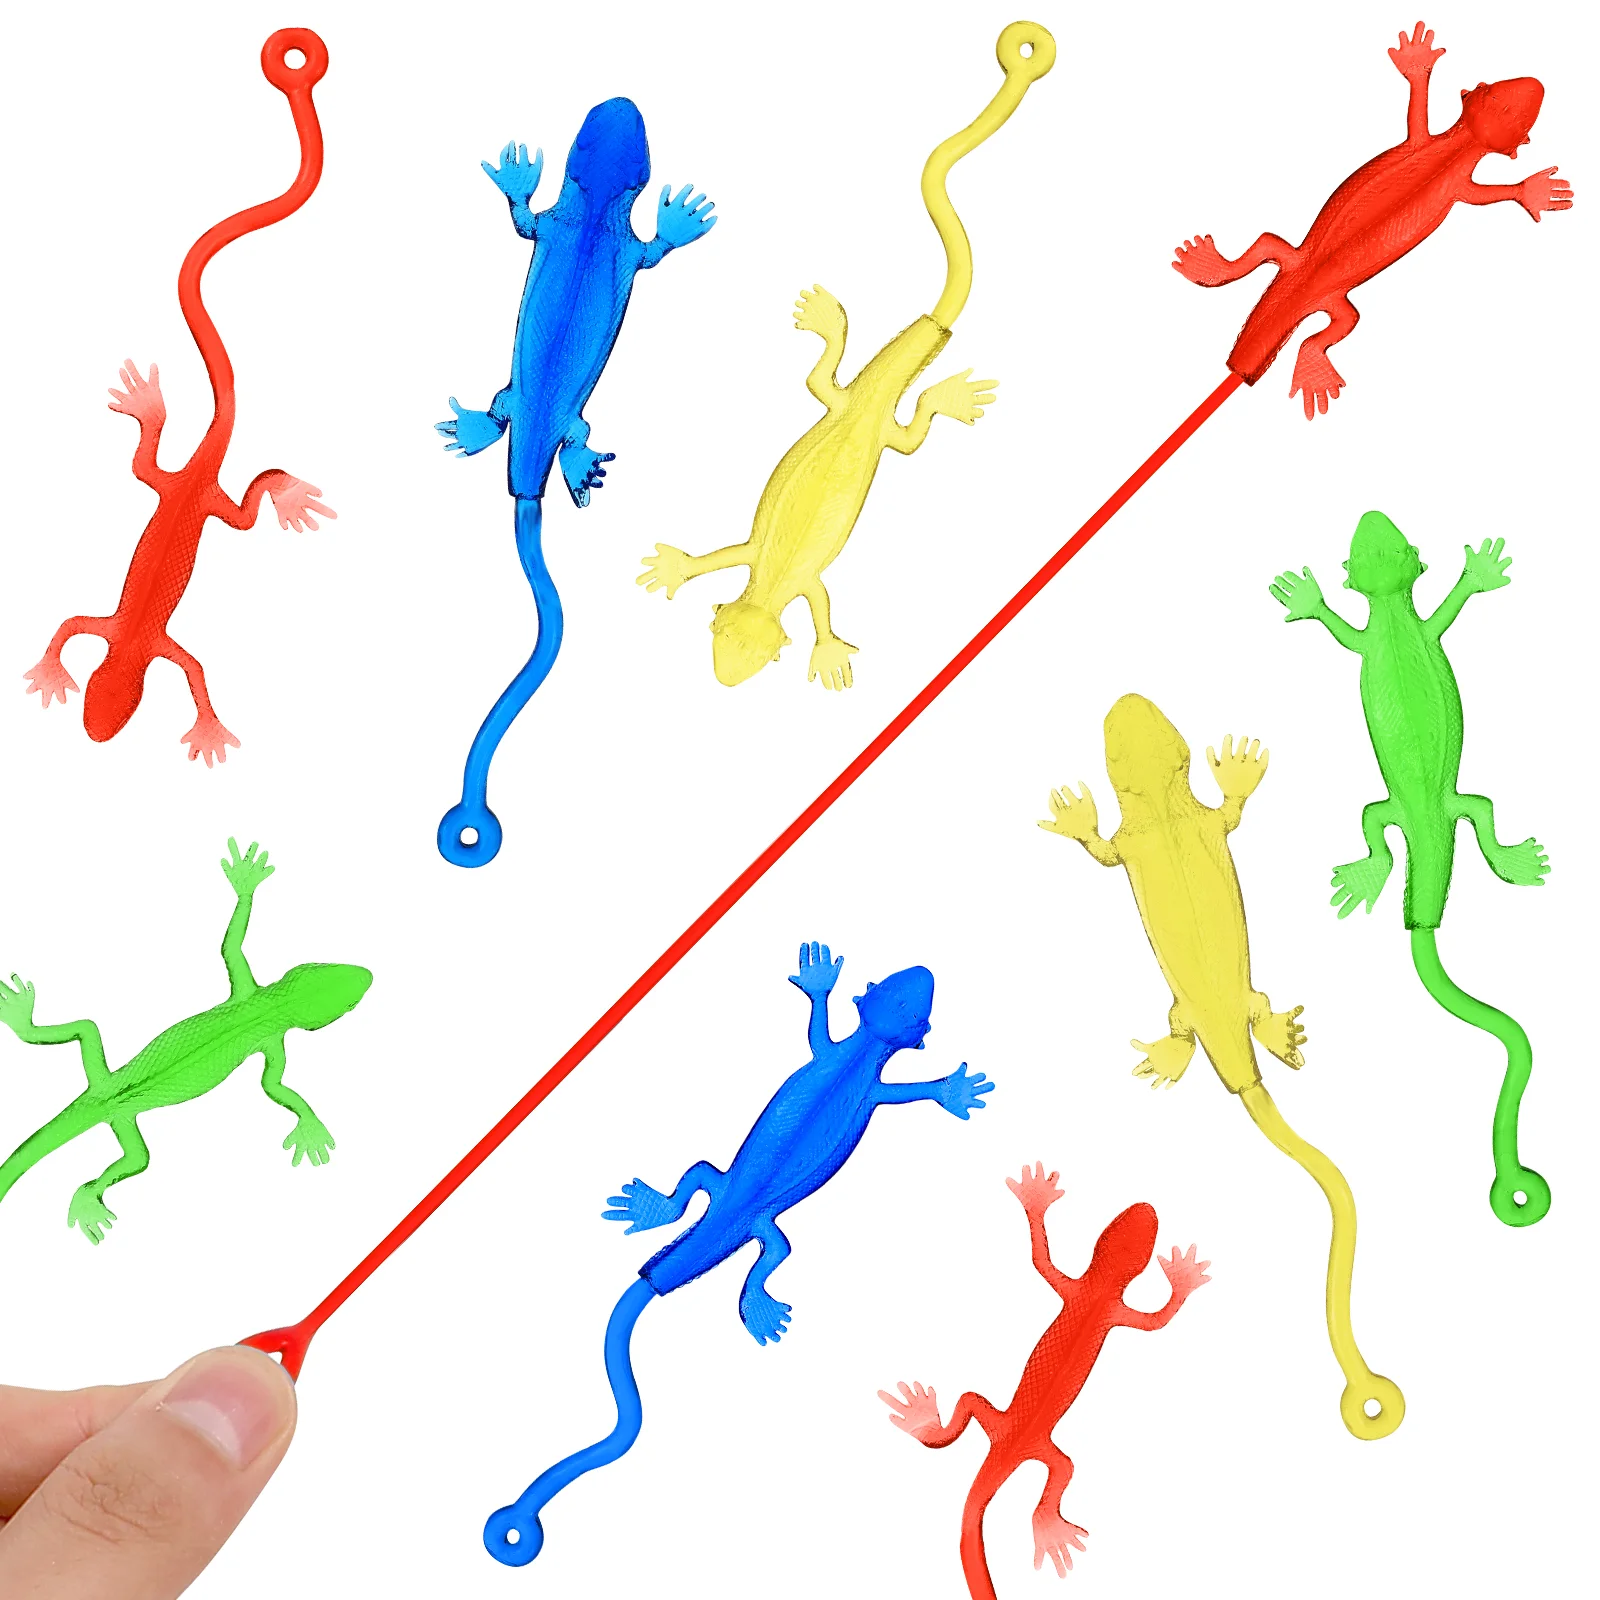 

Sticky Toys Stretchy Kids Lizard Party Favors Hands Lizards Wall Toy Animals Novelty Funny Sensory The Elastic Toddlers Prizes